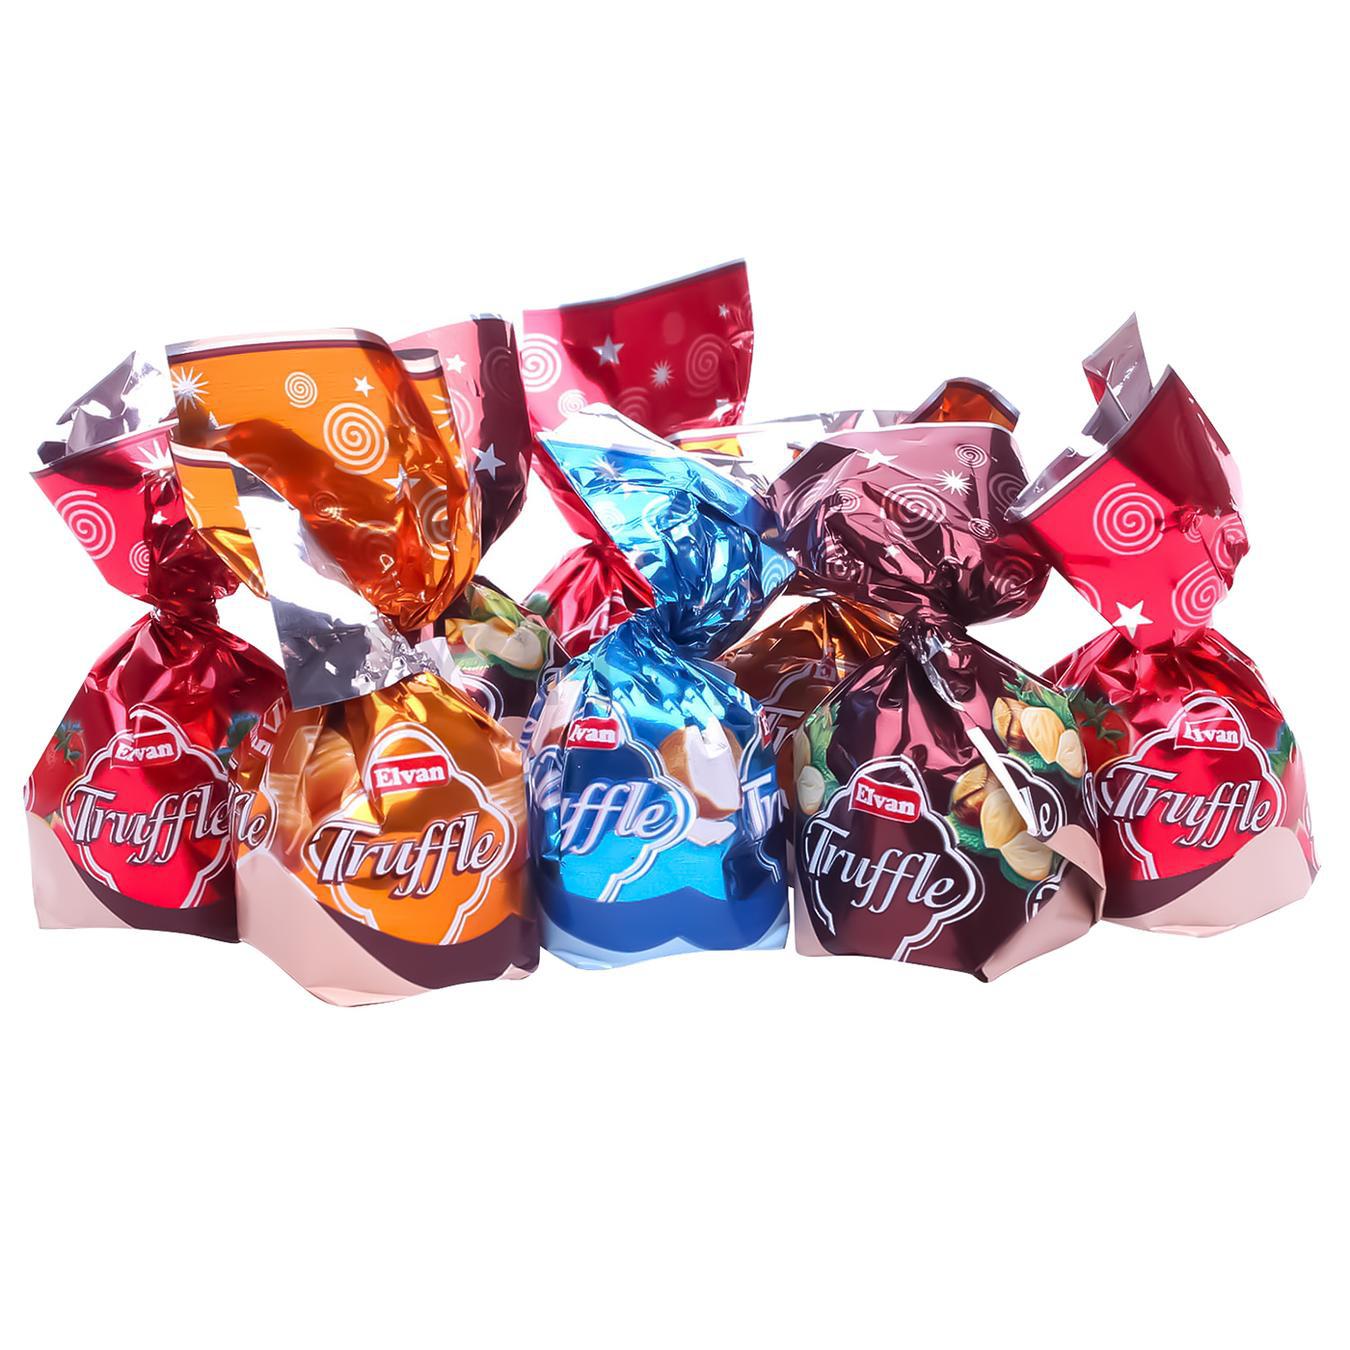 ELVAN candies chocolate truffle bag mix by weight